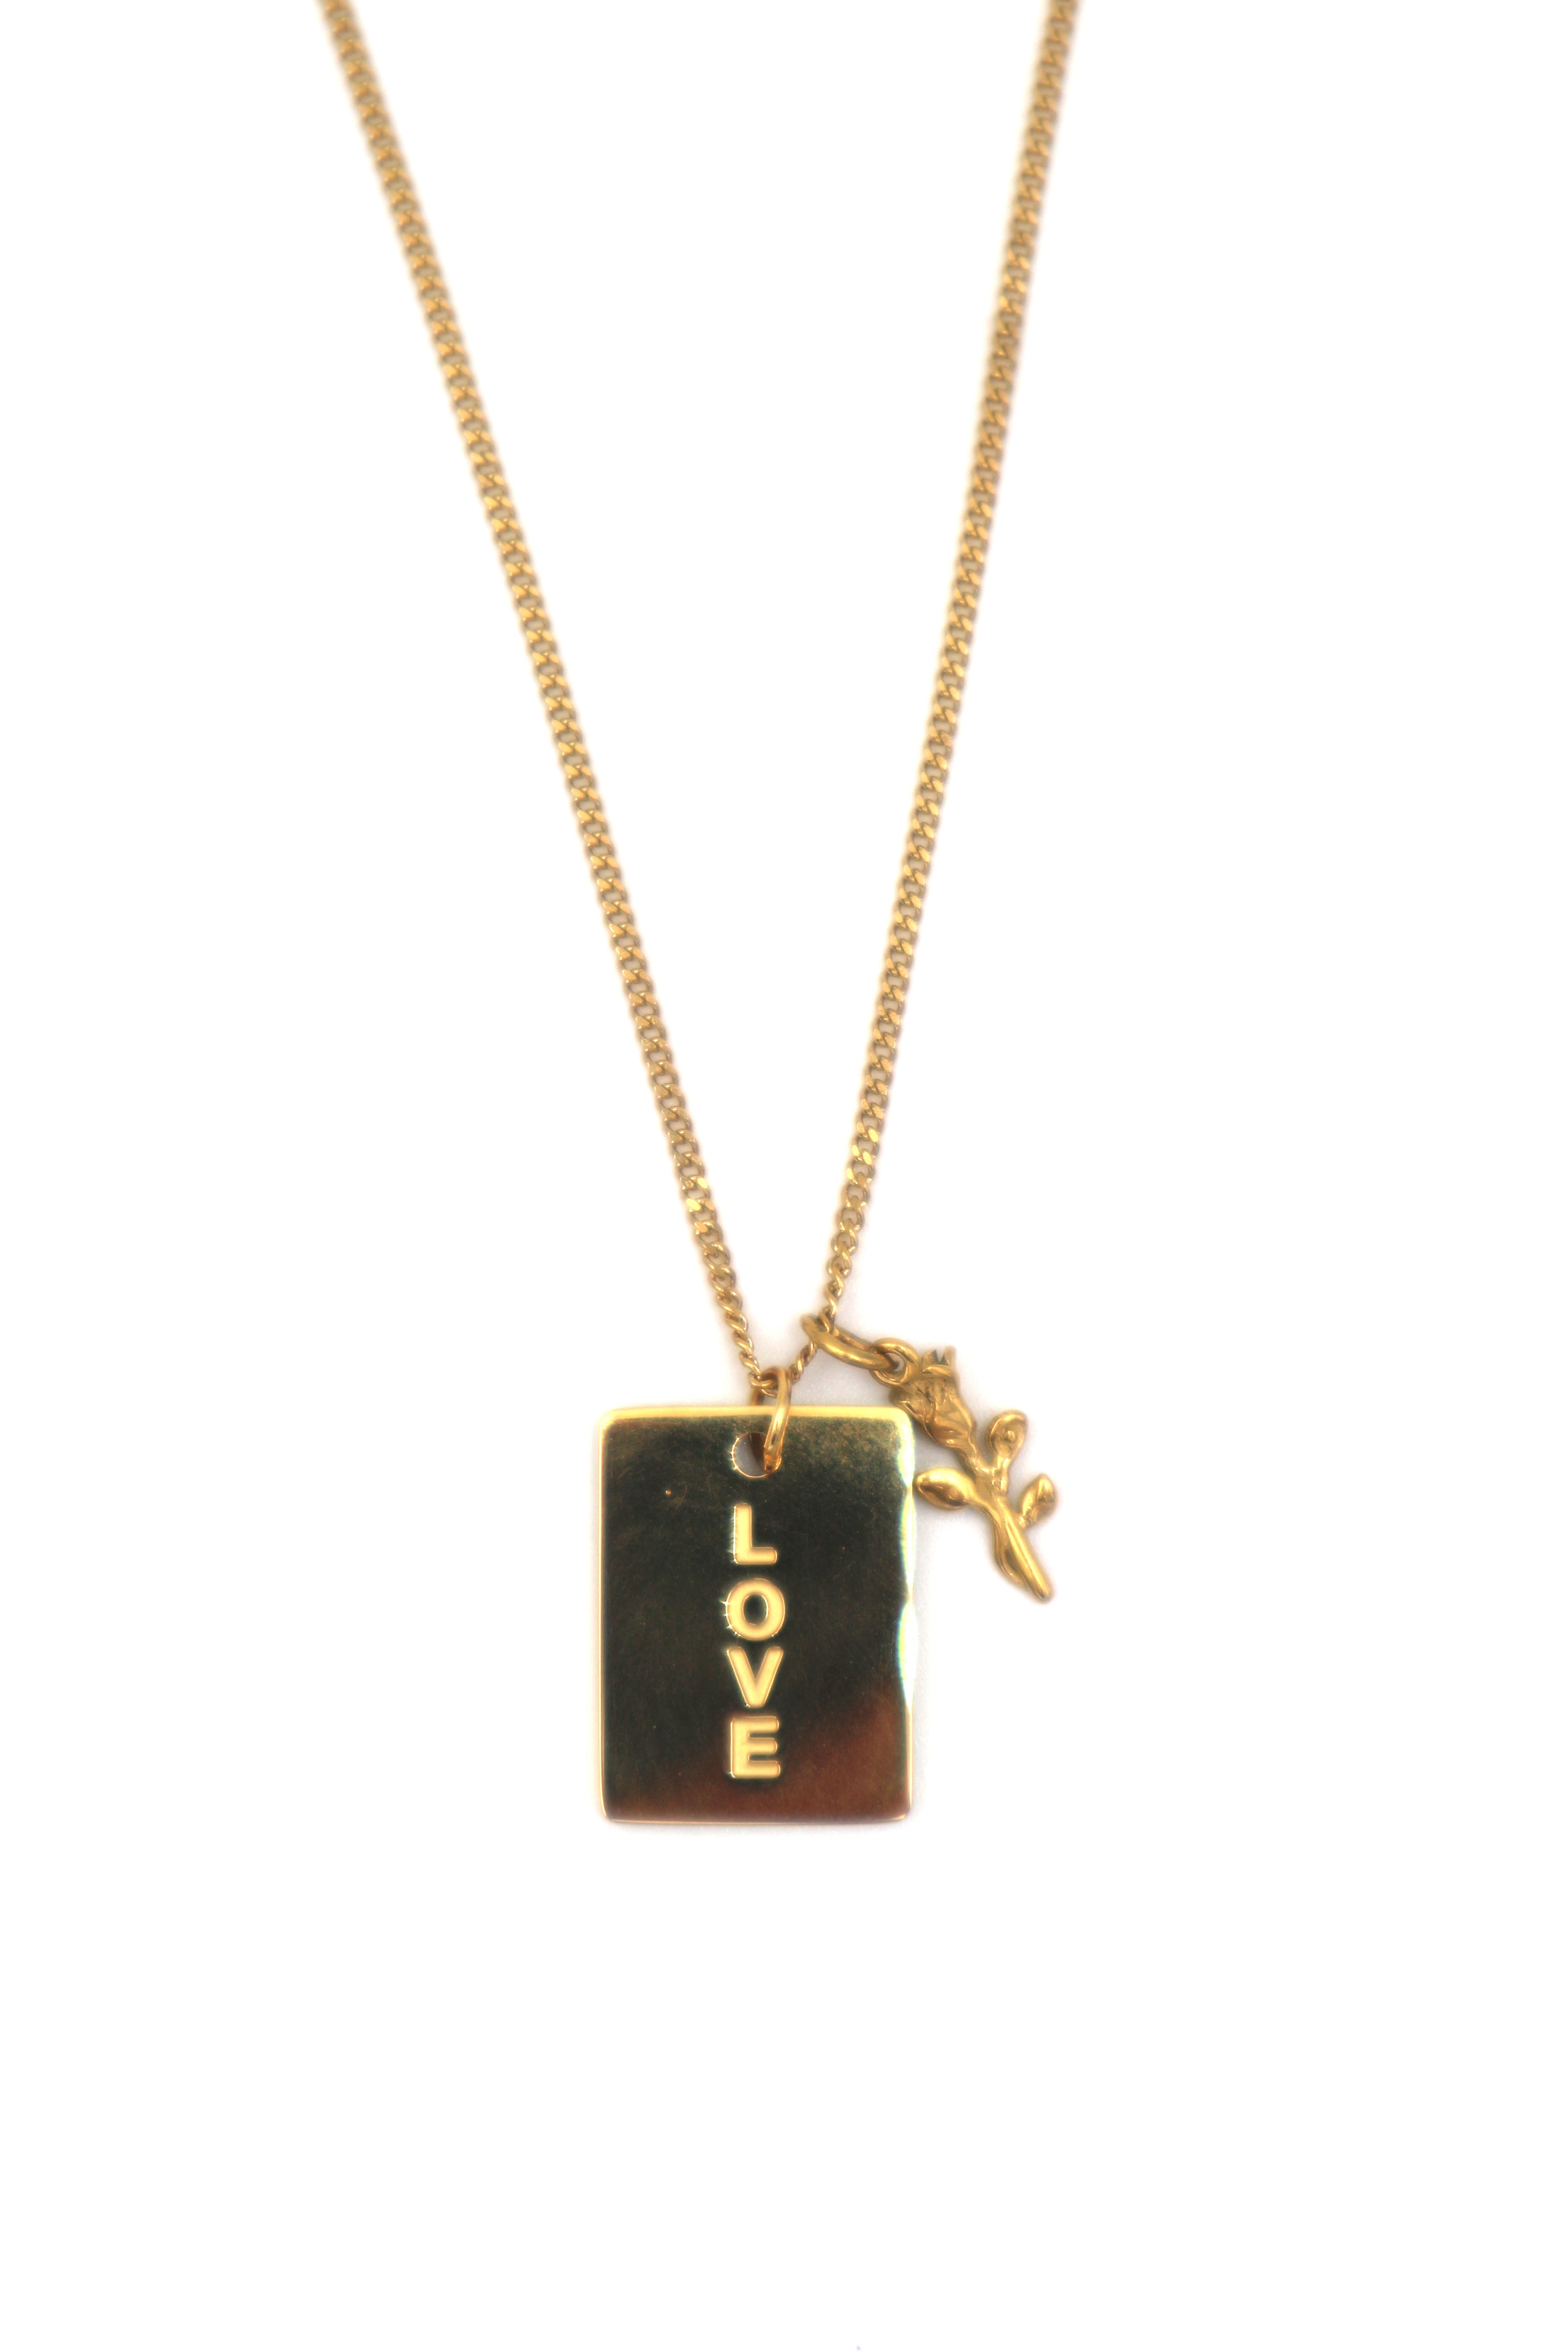 LOVE // The LOVE double-sided medallion